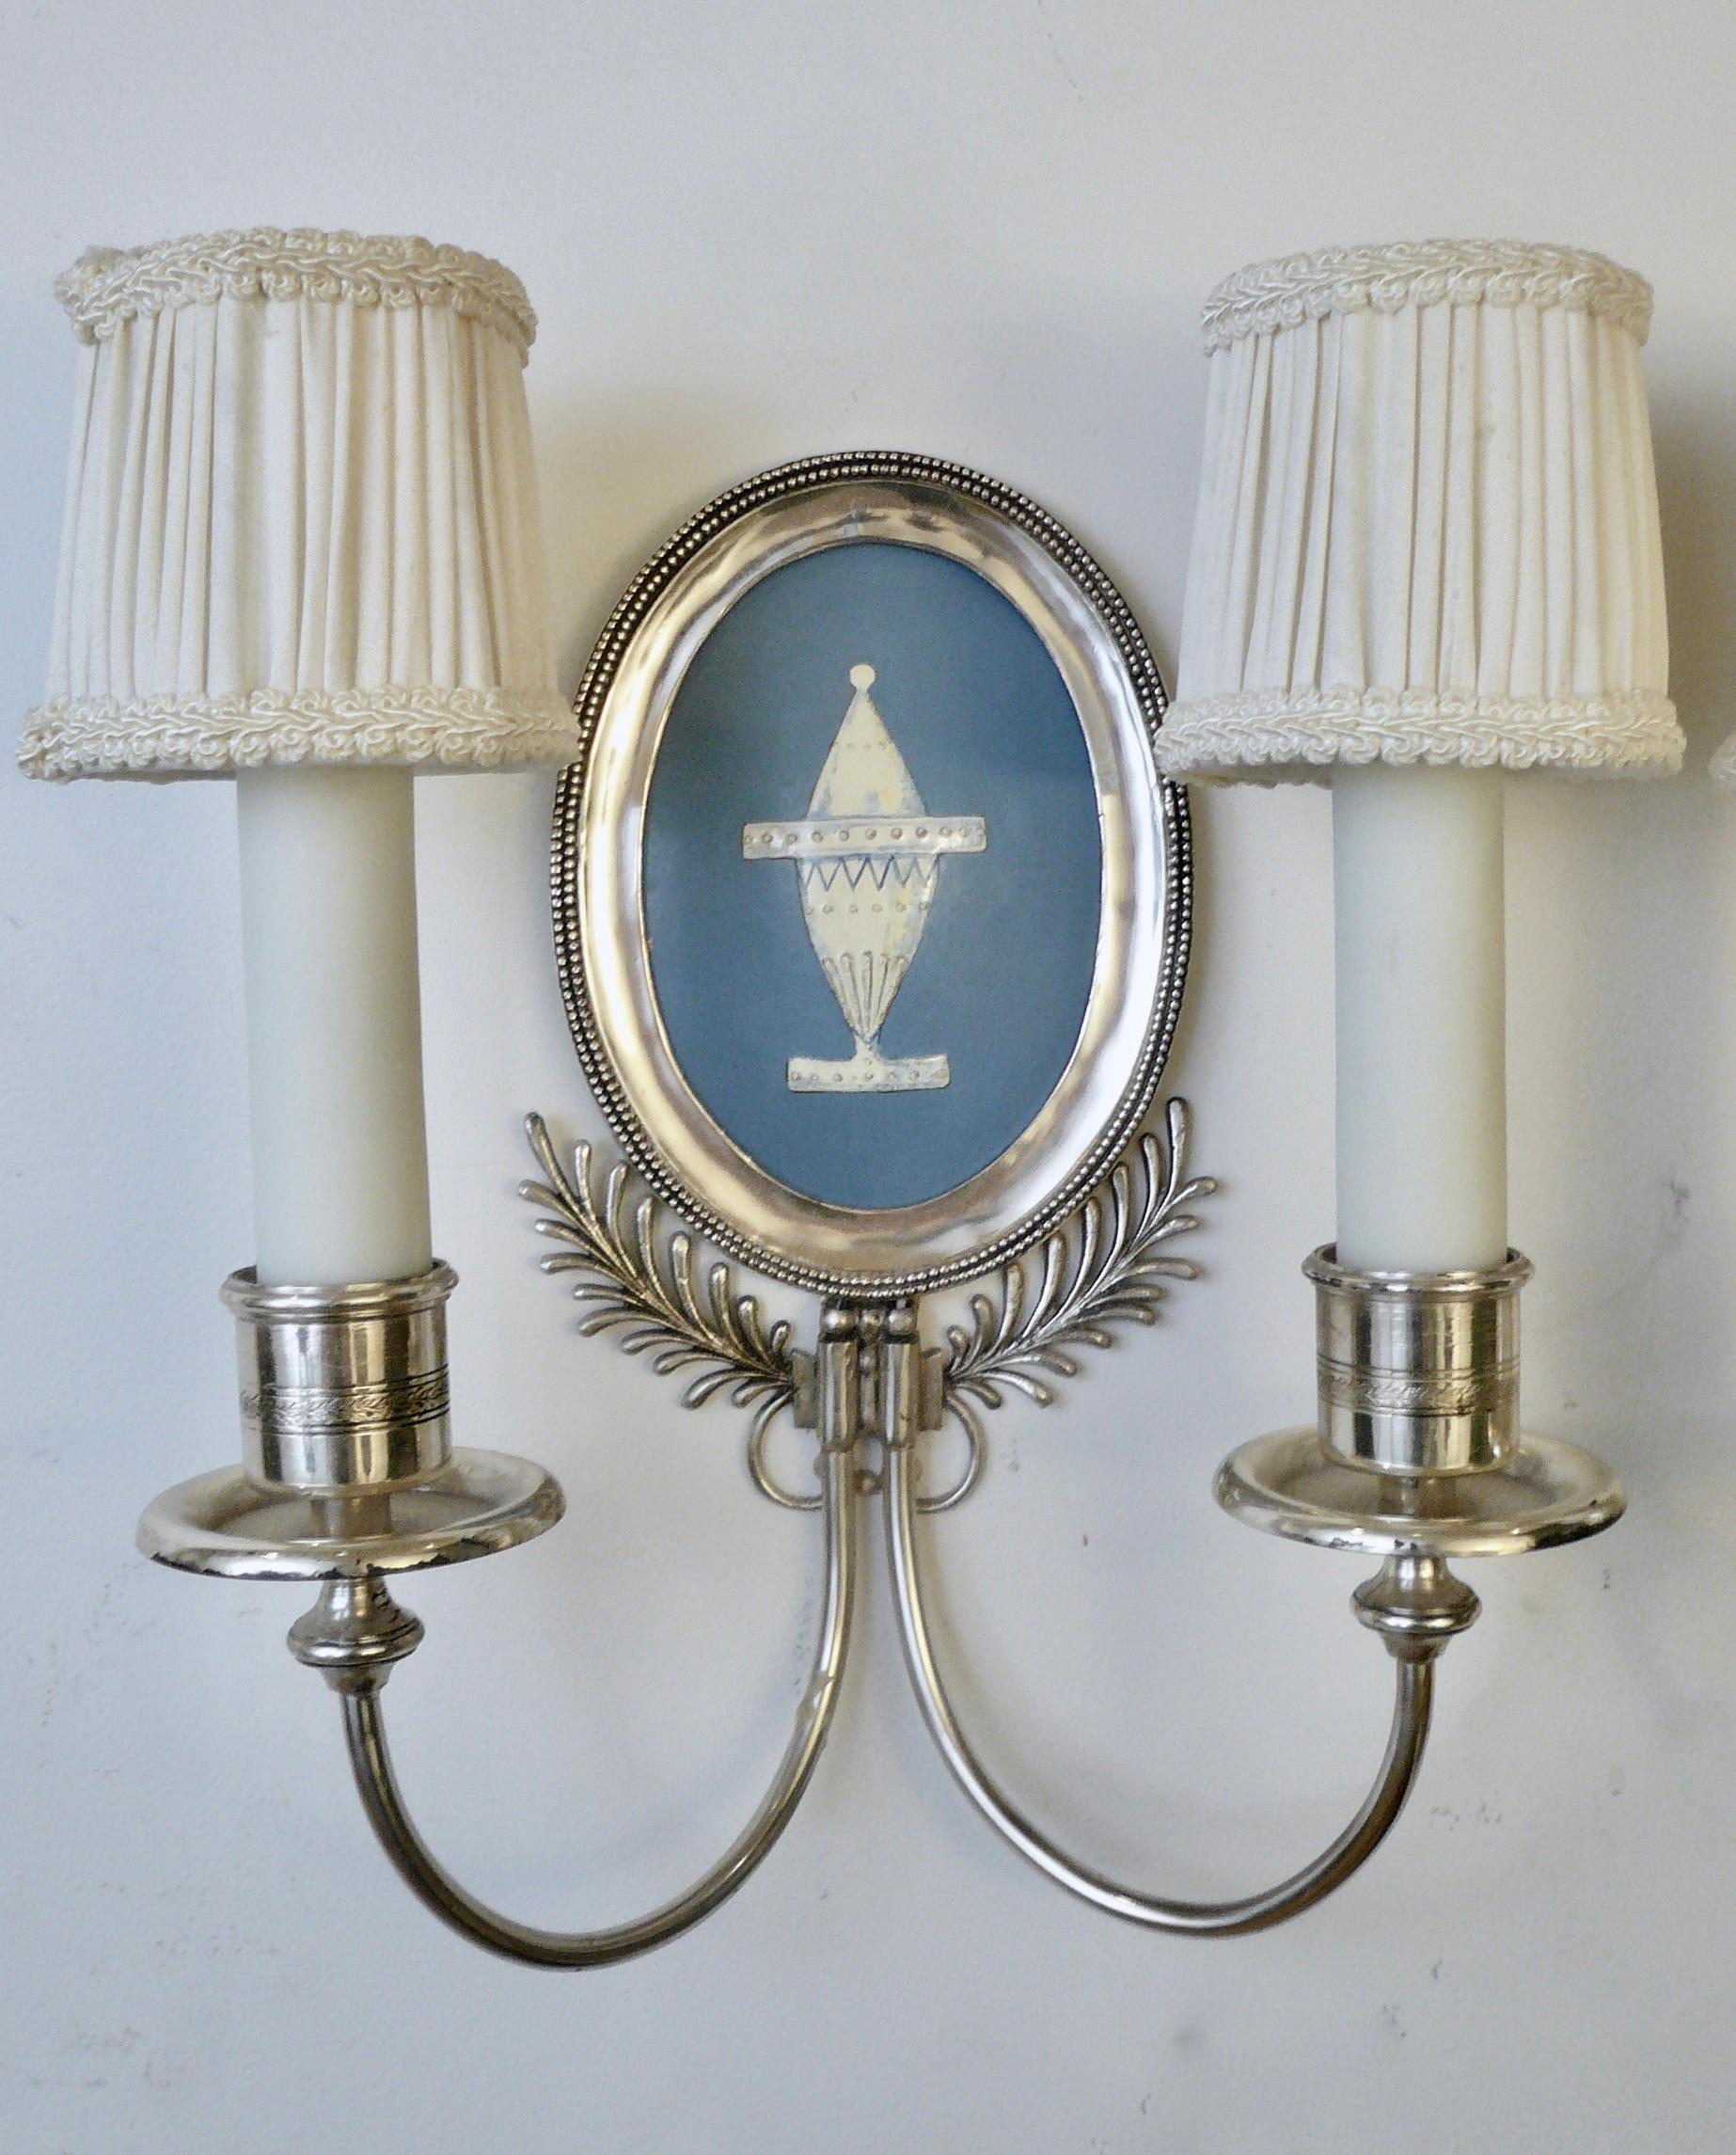 This beautiful pair of signed sconces by renown maker Edward F. Caldwell feature oval Battersea type enamel on copper reserves decorated with neoclassical style urns. The silver plating is original and in excellent condition.
 